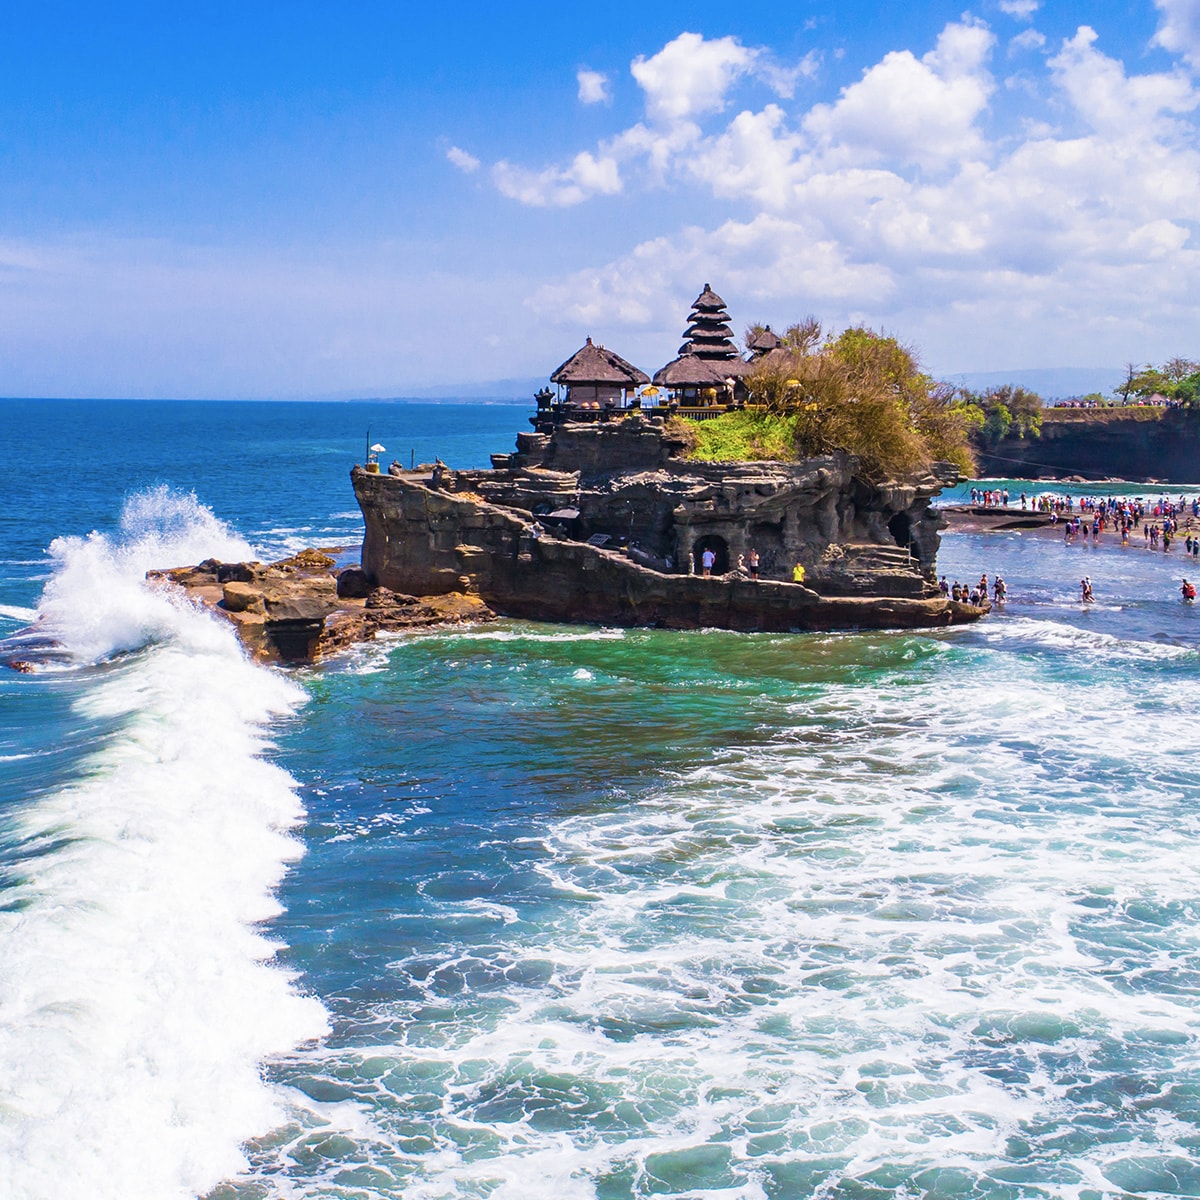 Tanah Lot: Magnificent Balinese Temple in the Open Ocean